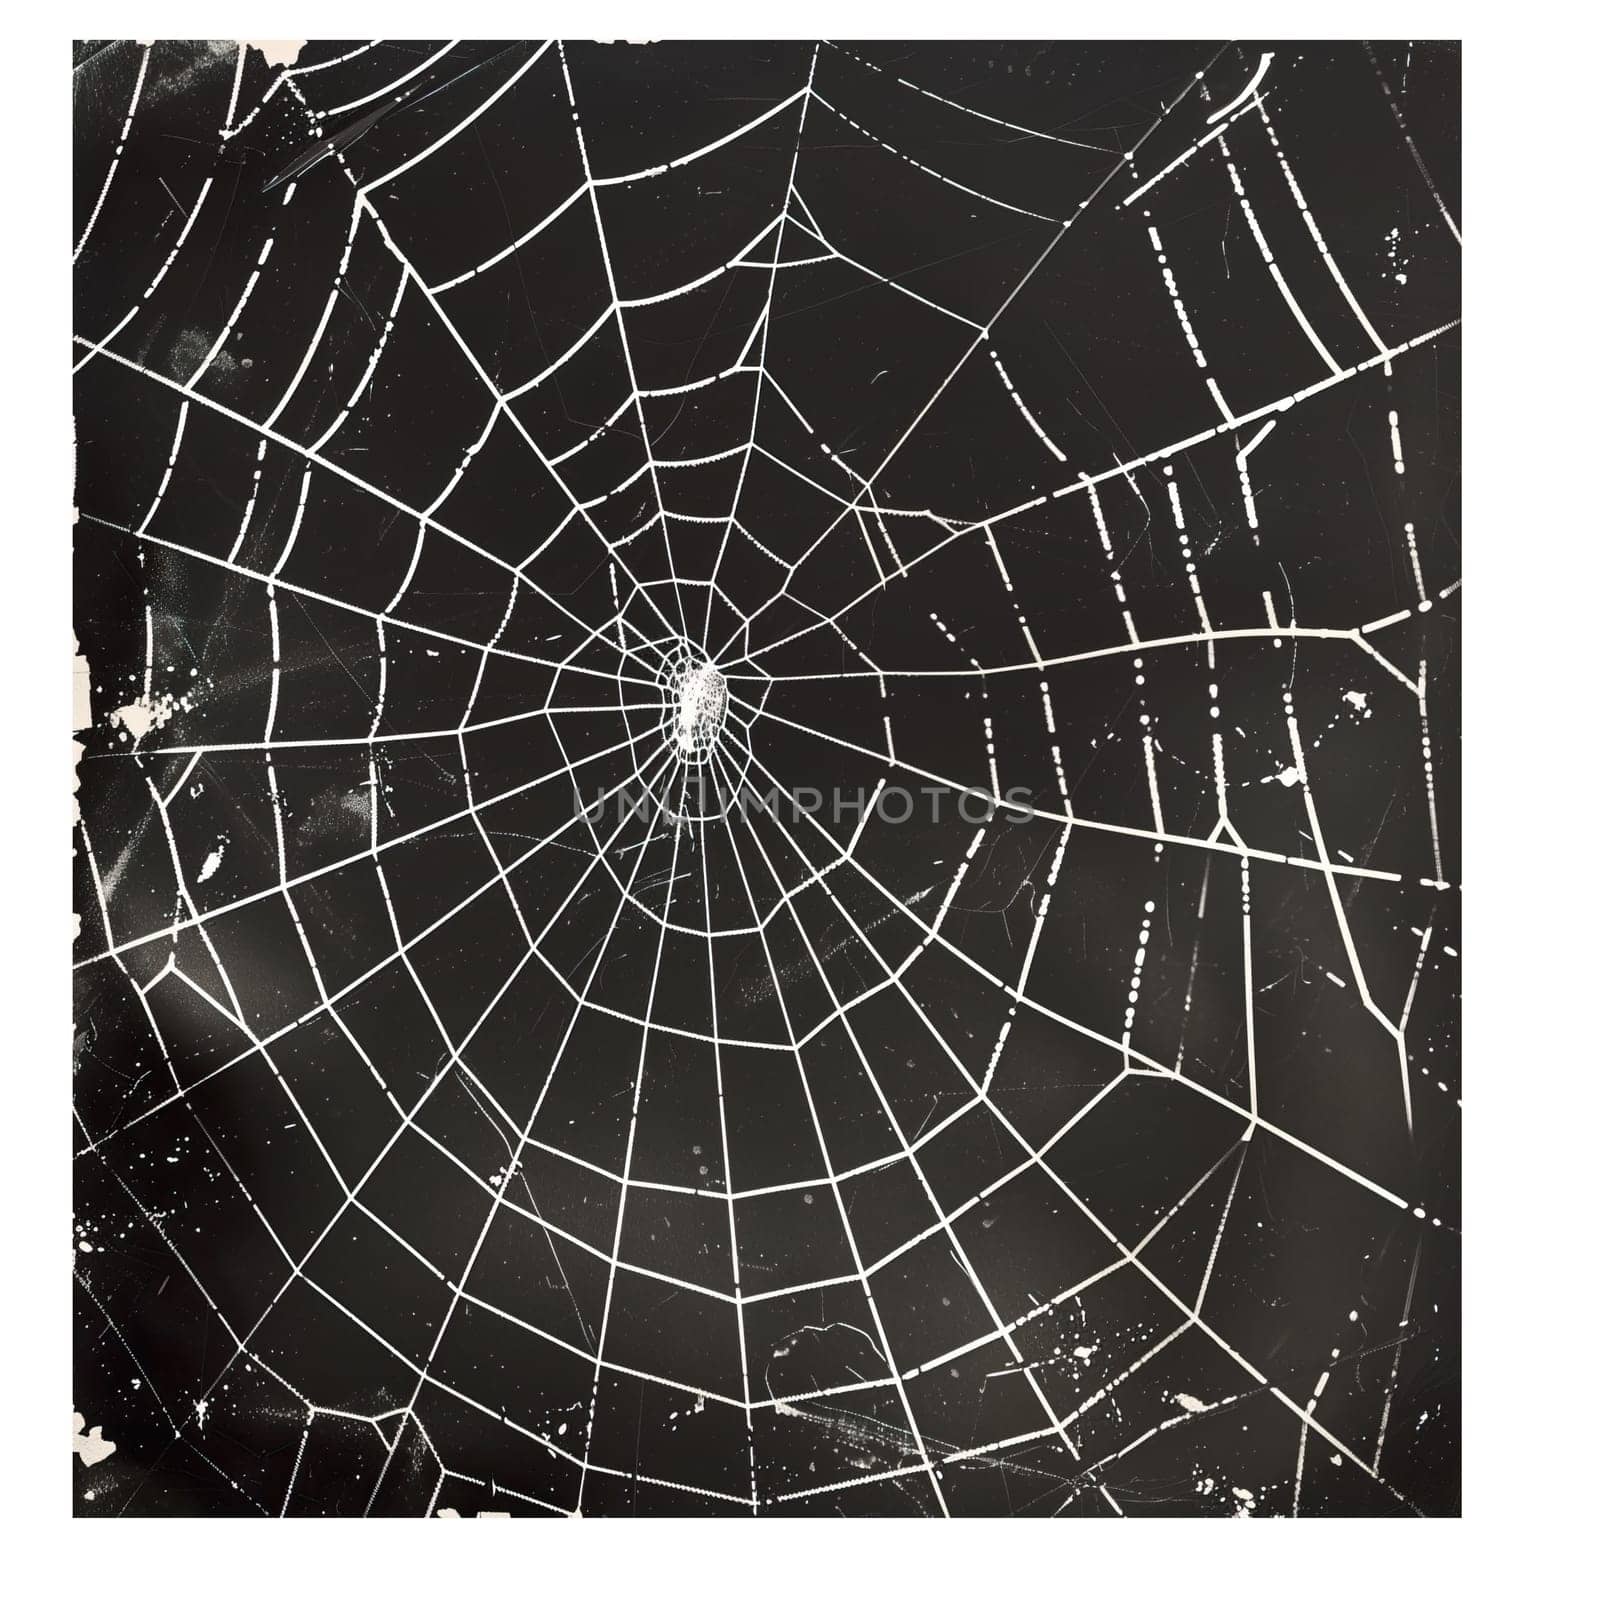 Monochrome vintage photo of halloween spiderweb cut out image by Dustick